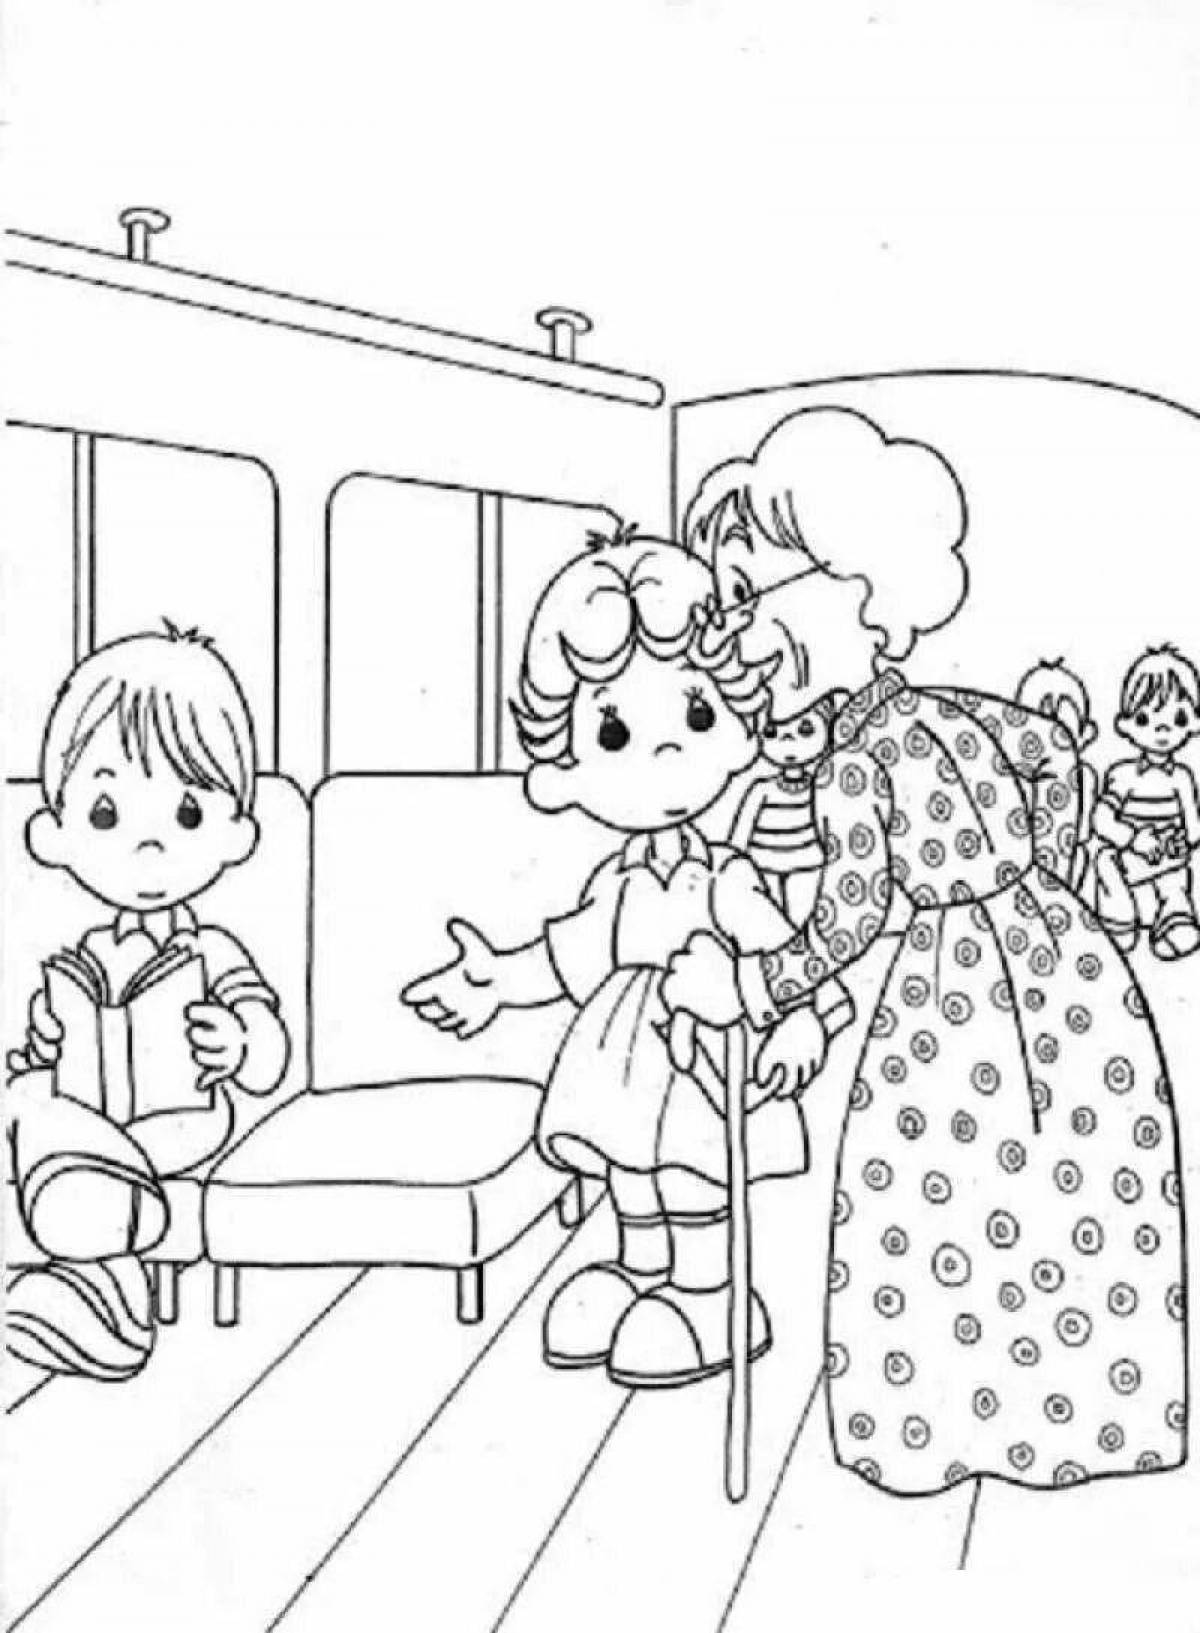 Coloring page bright kindness